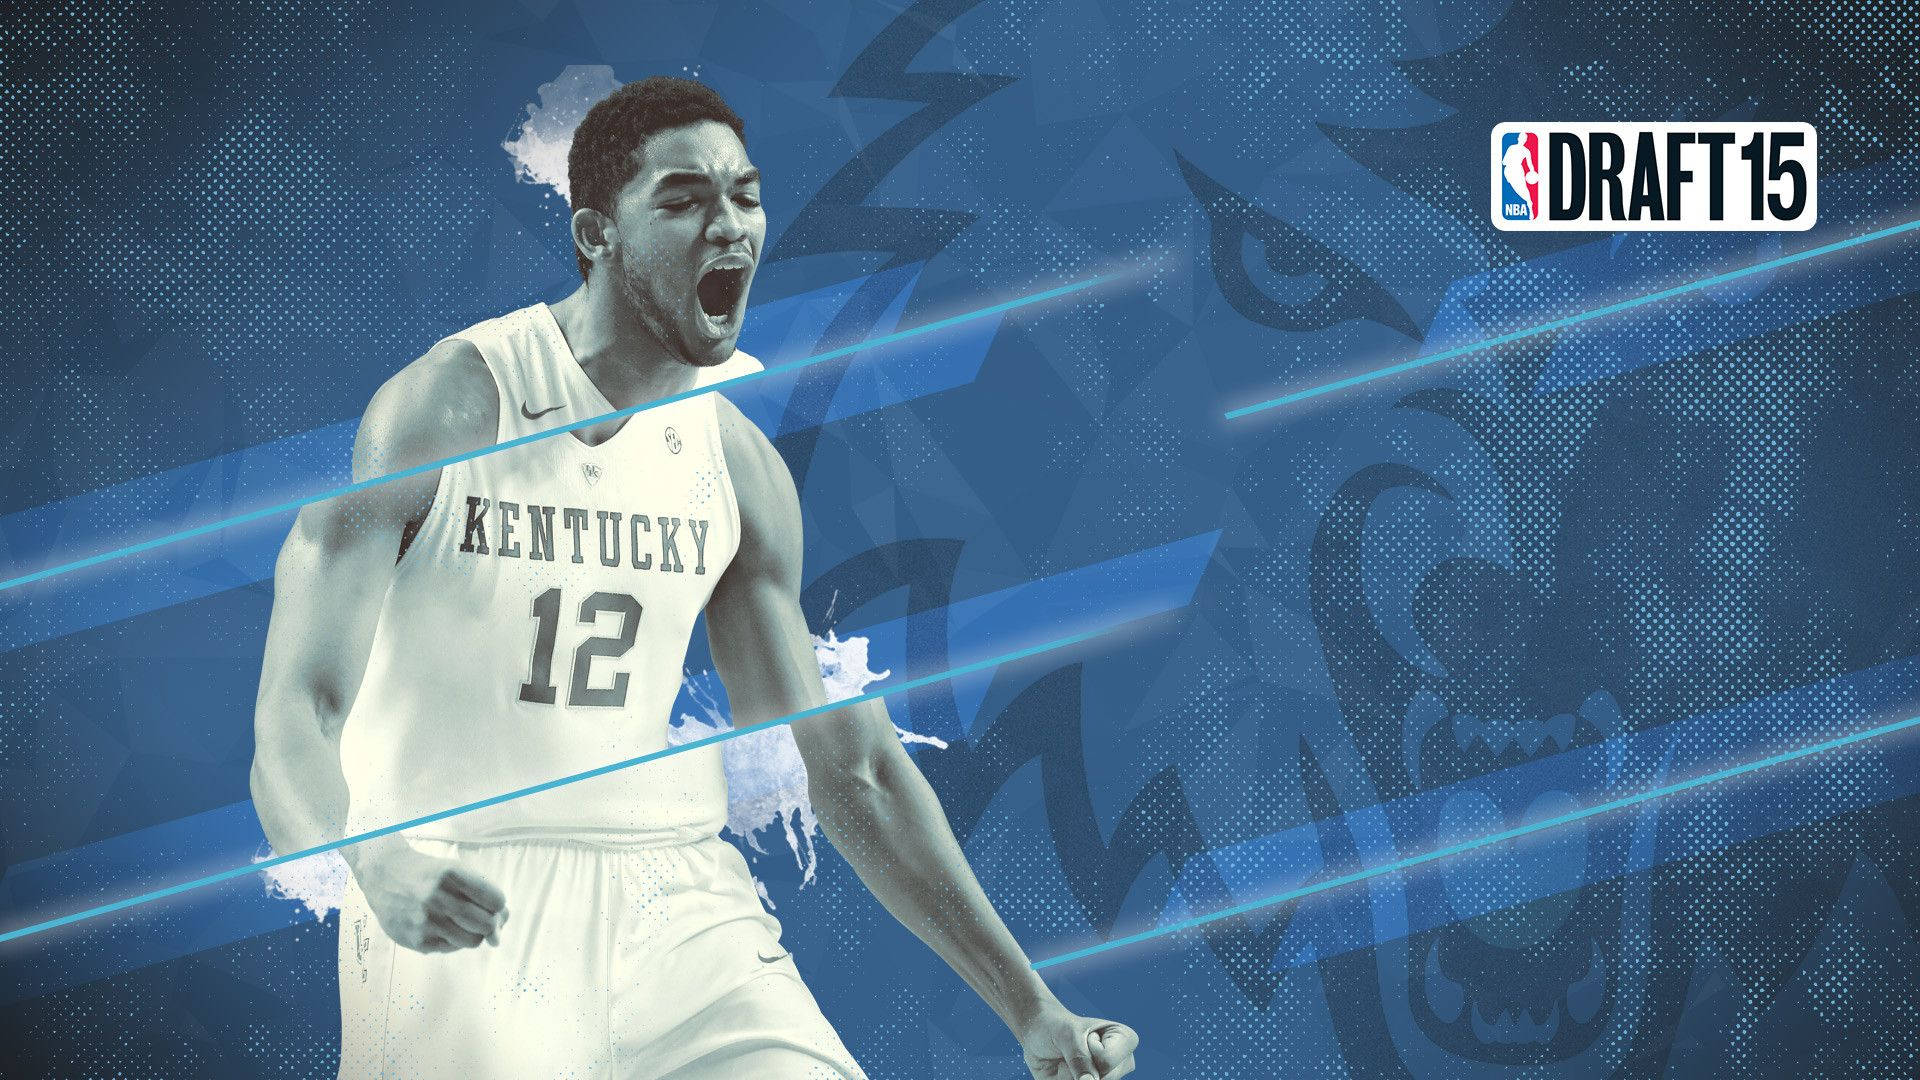 Karl-anthony Towns Kentucky Jersey Background